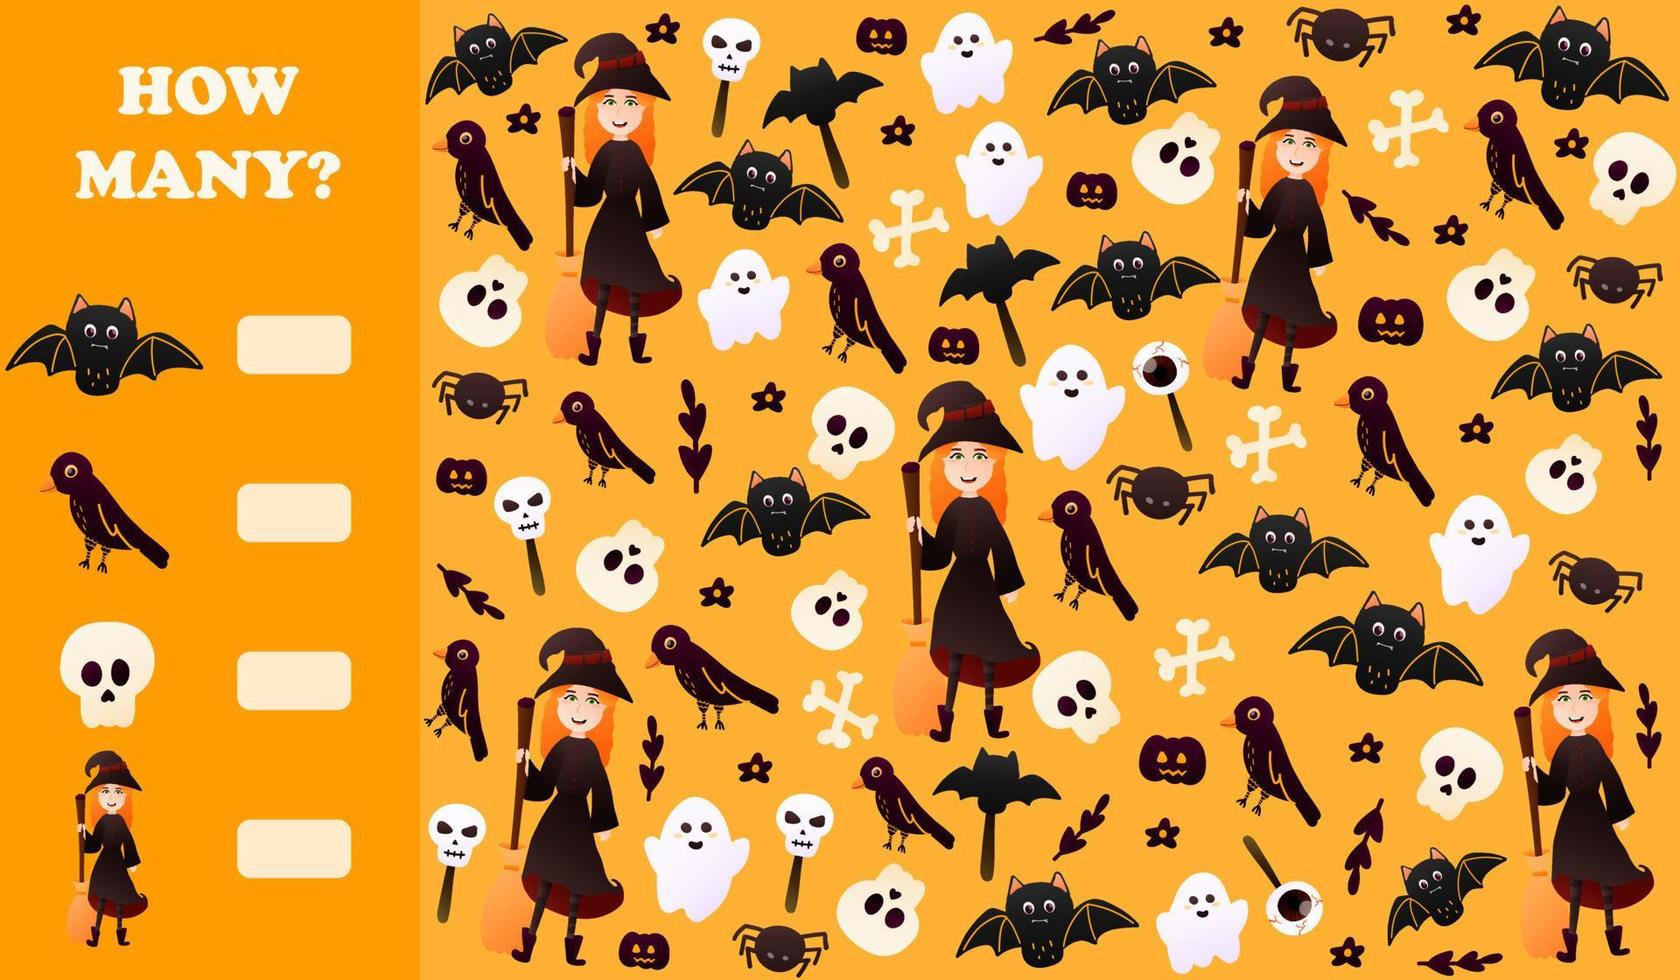 How many puzzle or riddle for kids for halloween with witch character holding broom, ghosts and bats, spooky elements on orange background, printable worksheet, indoor game vector